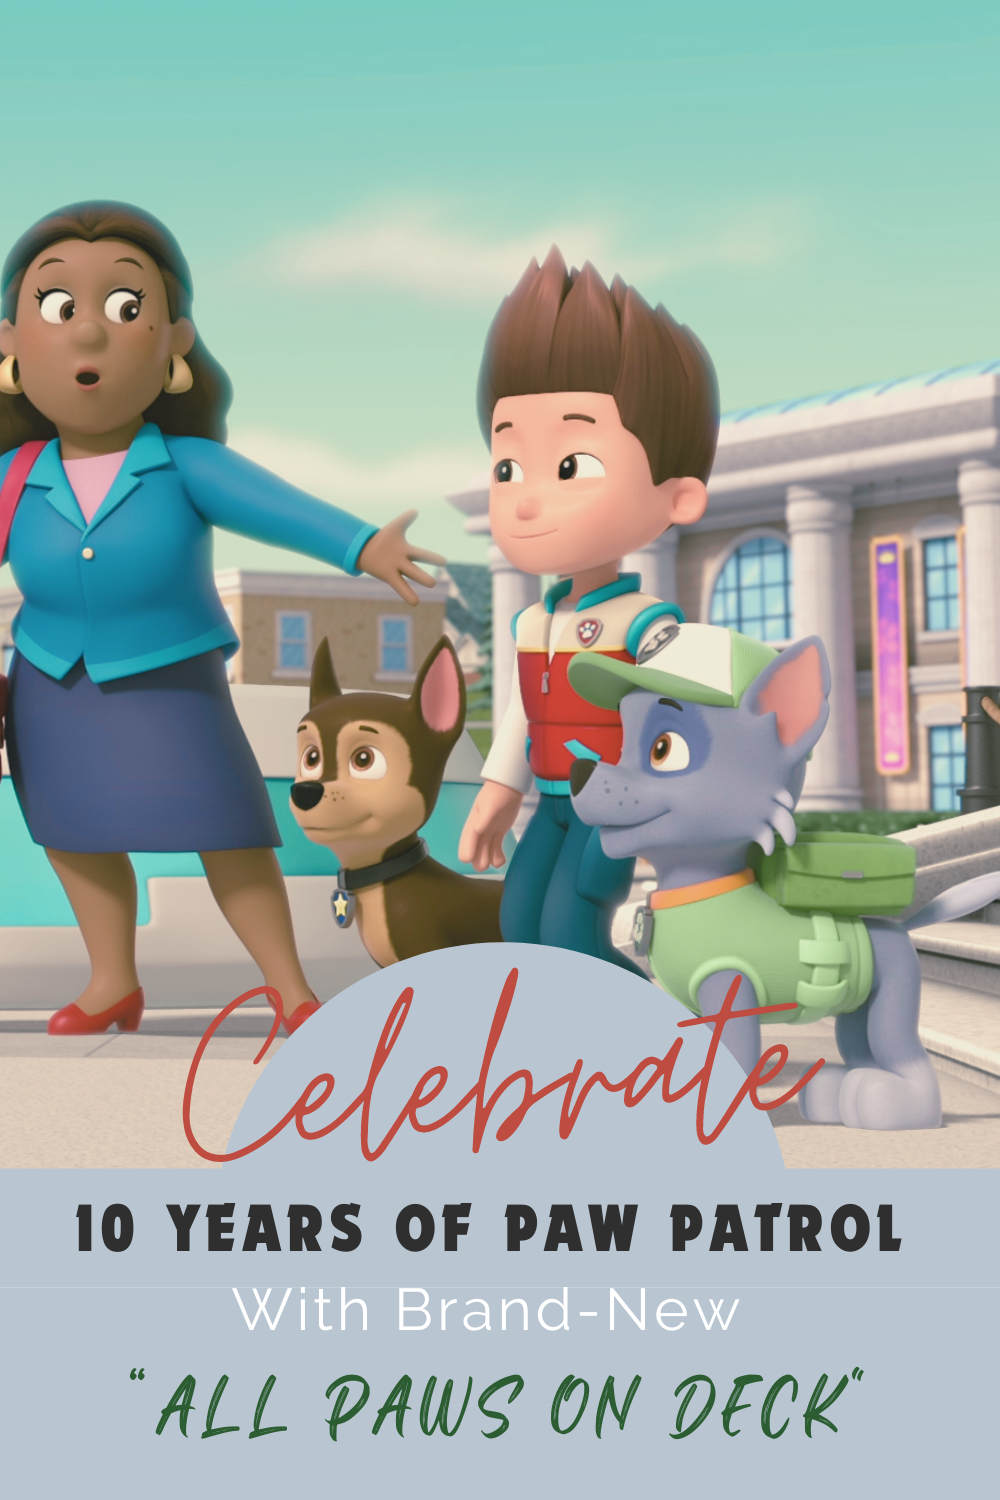 Celebrate 10 Years Of Paw Patrol With Brand-New “ALL PAWS ON DECK” Special post thumbnail image